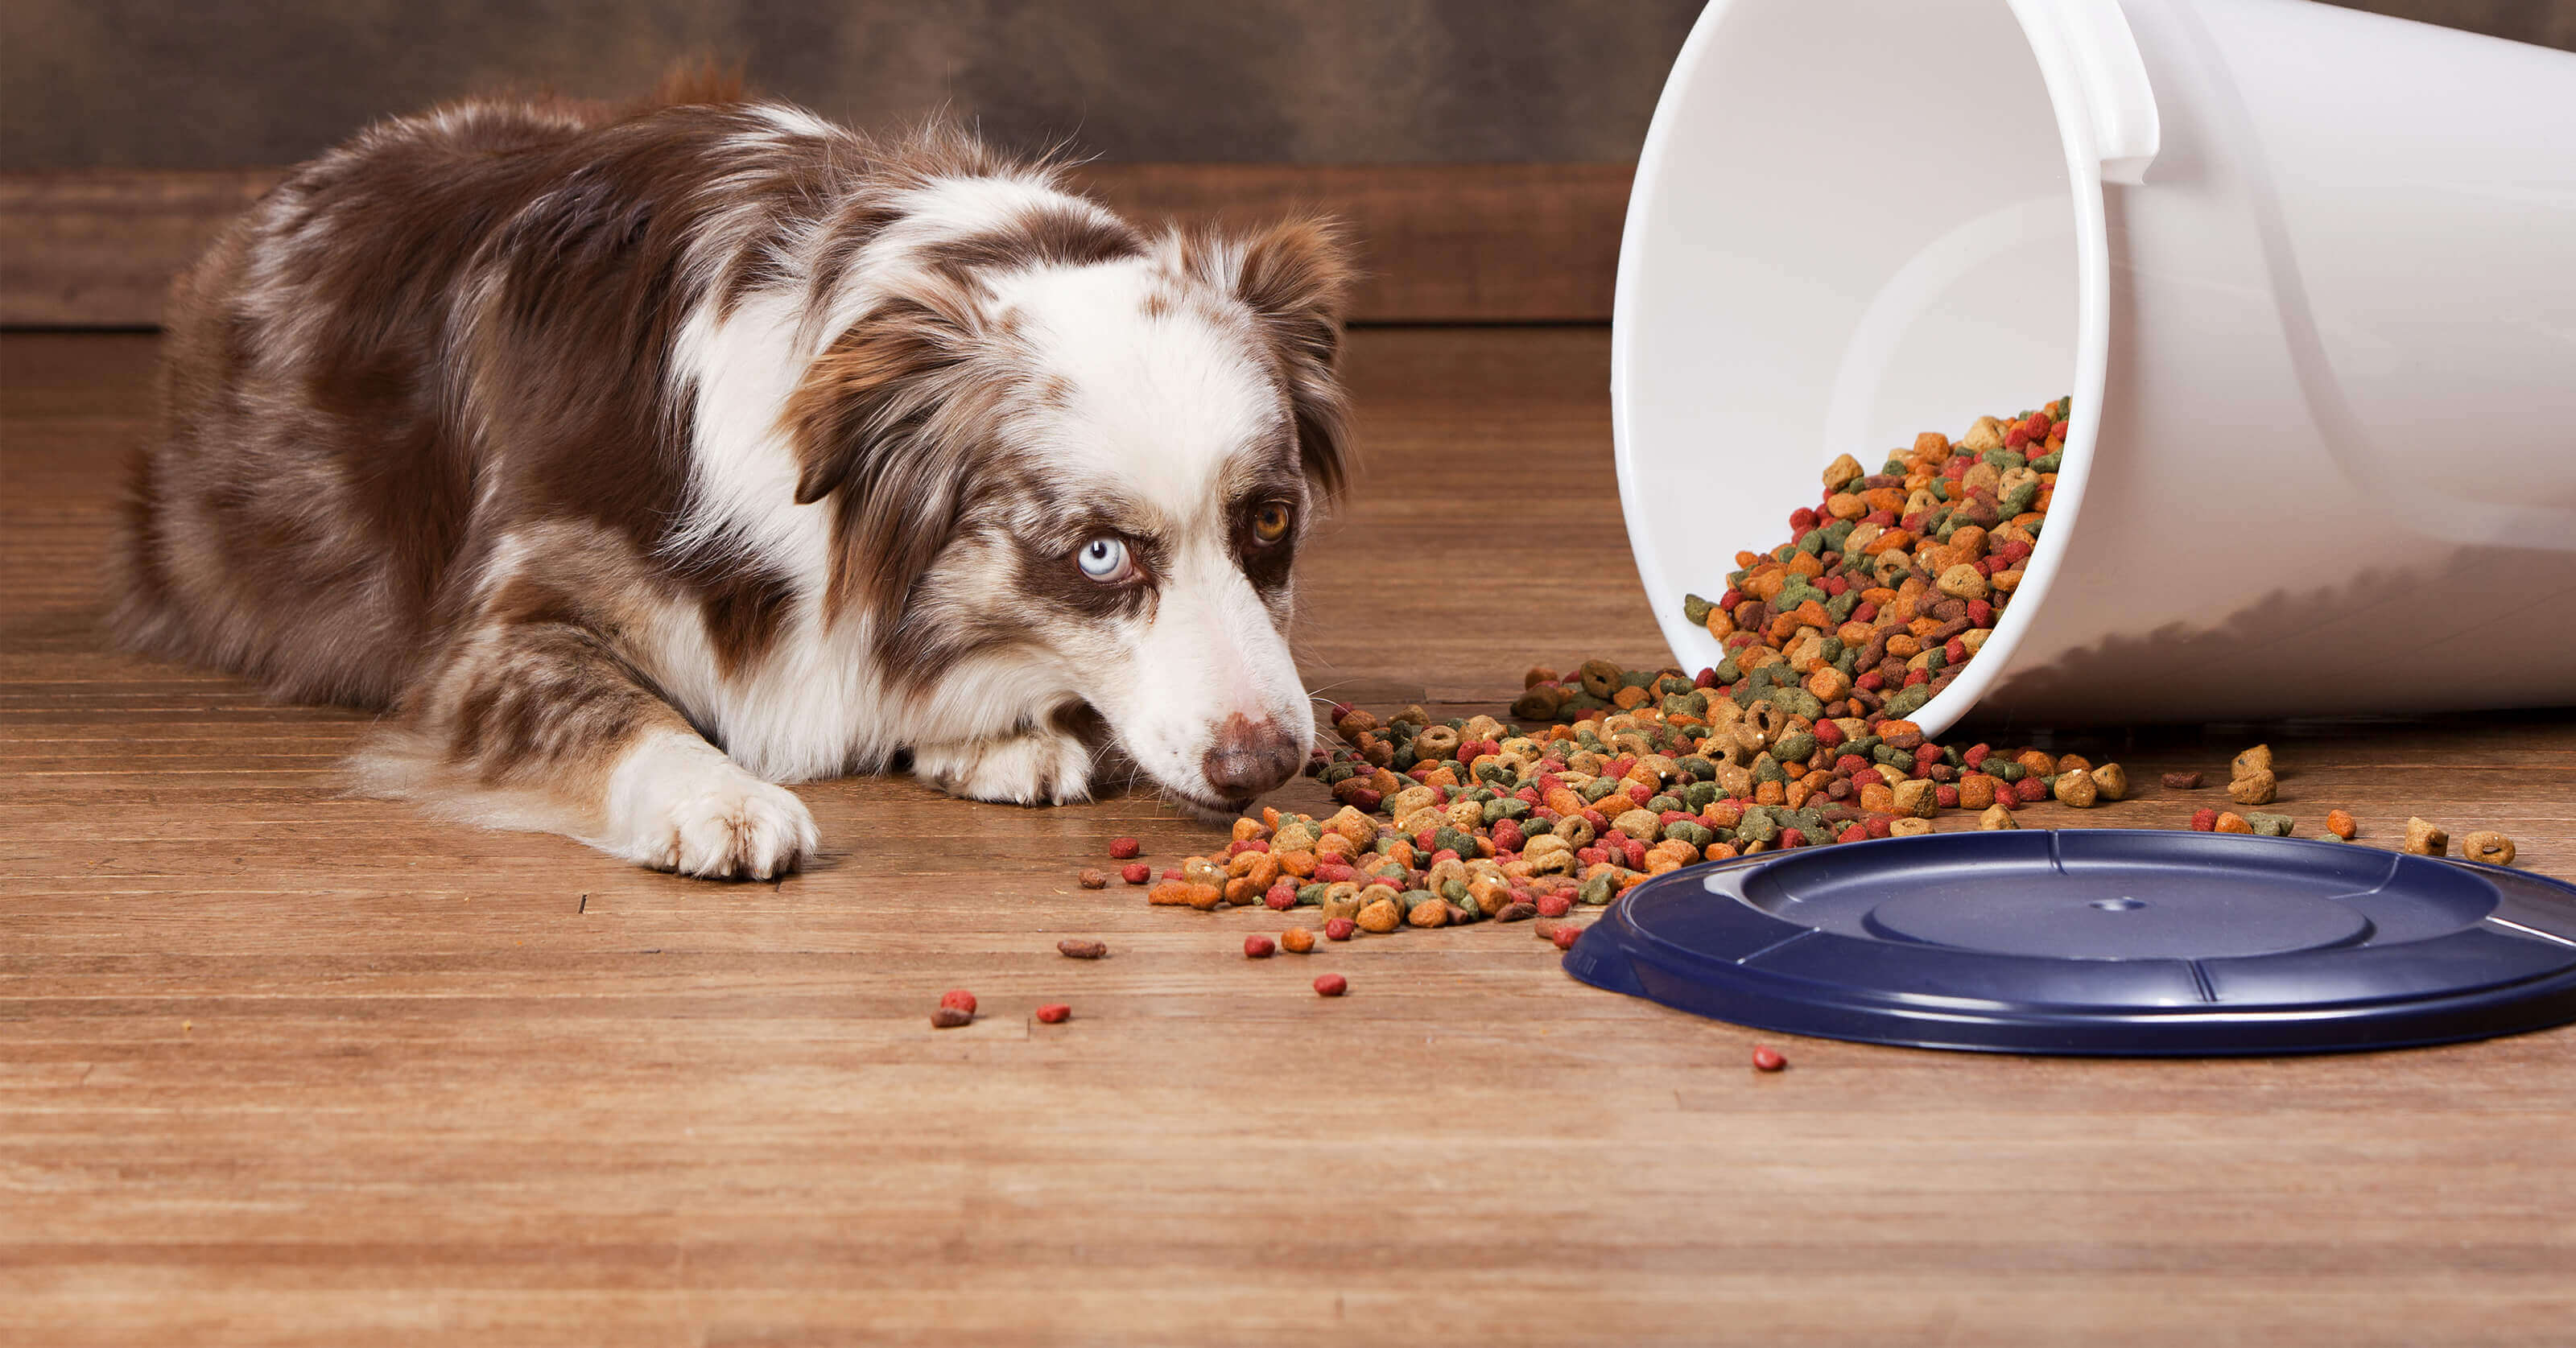 5 Crucial Steps to Keep Your Pets Healthy and Pest-free